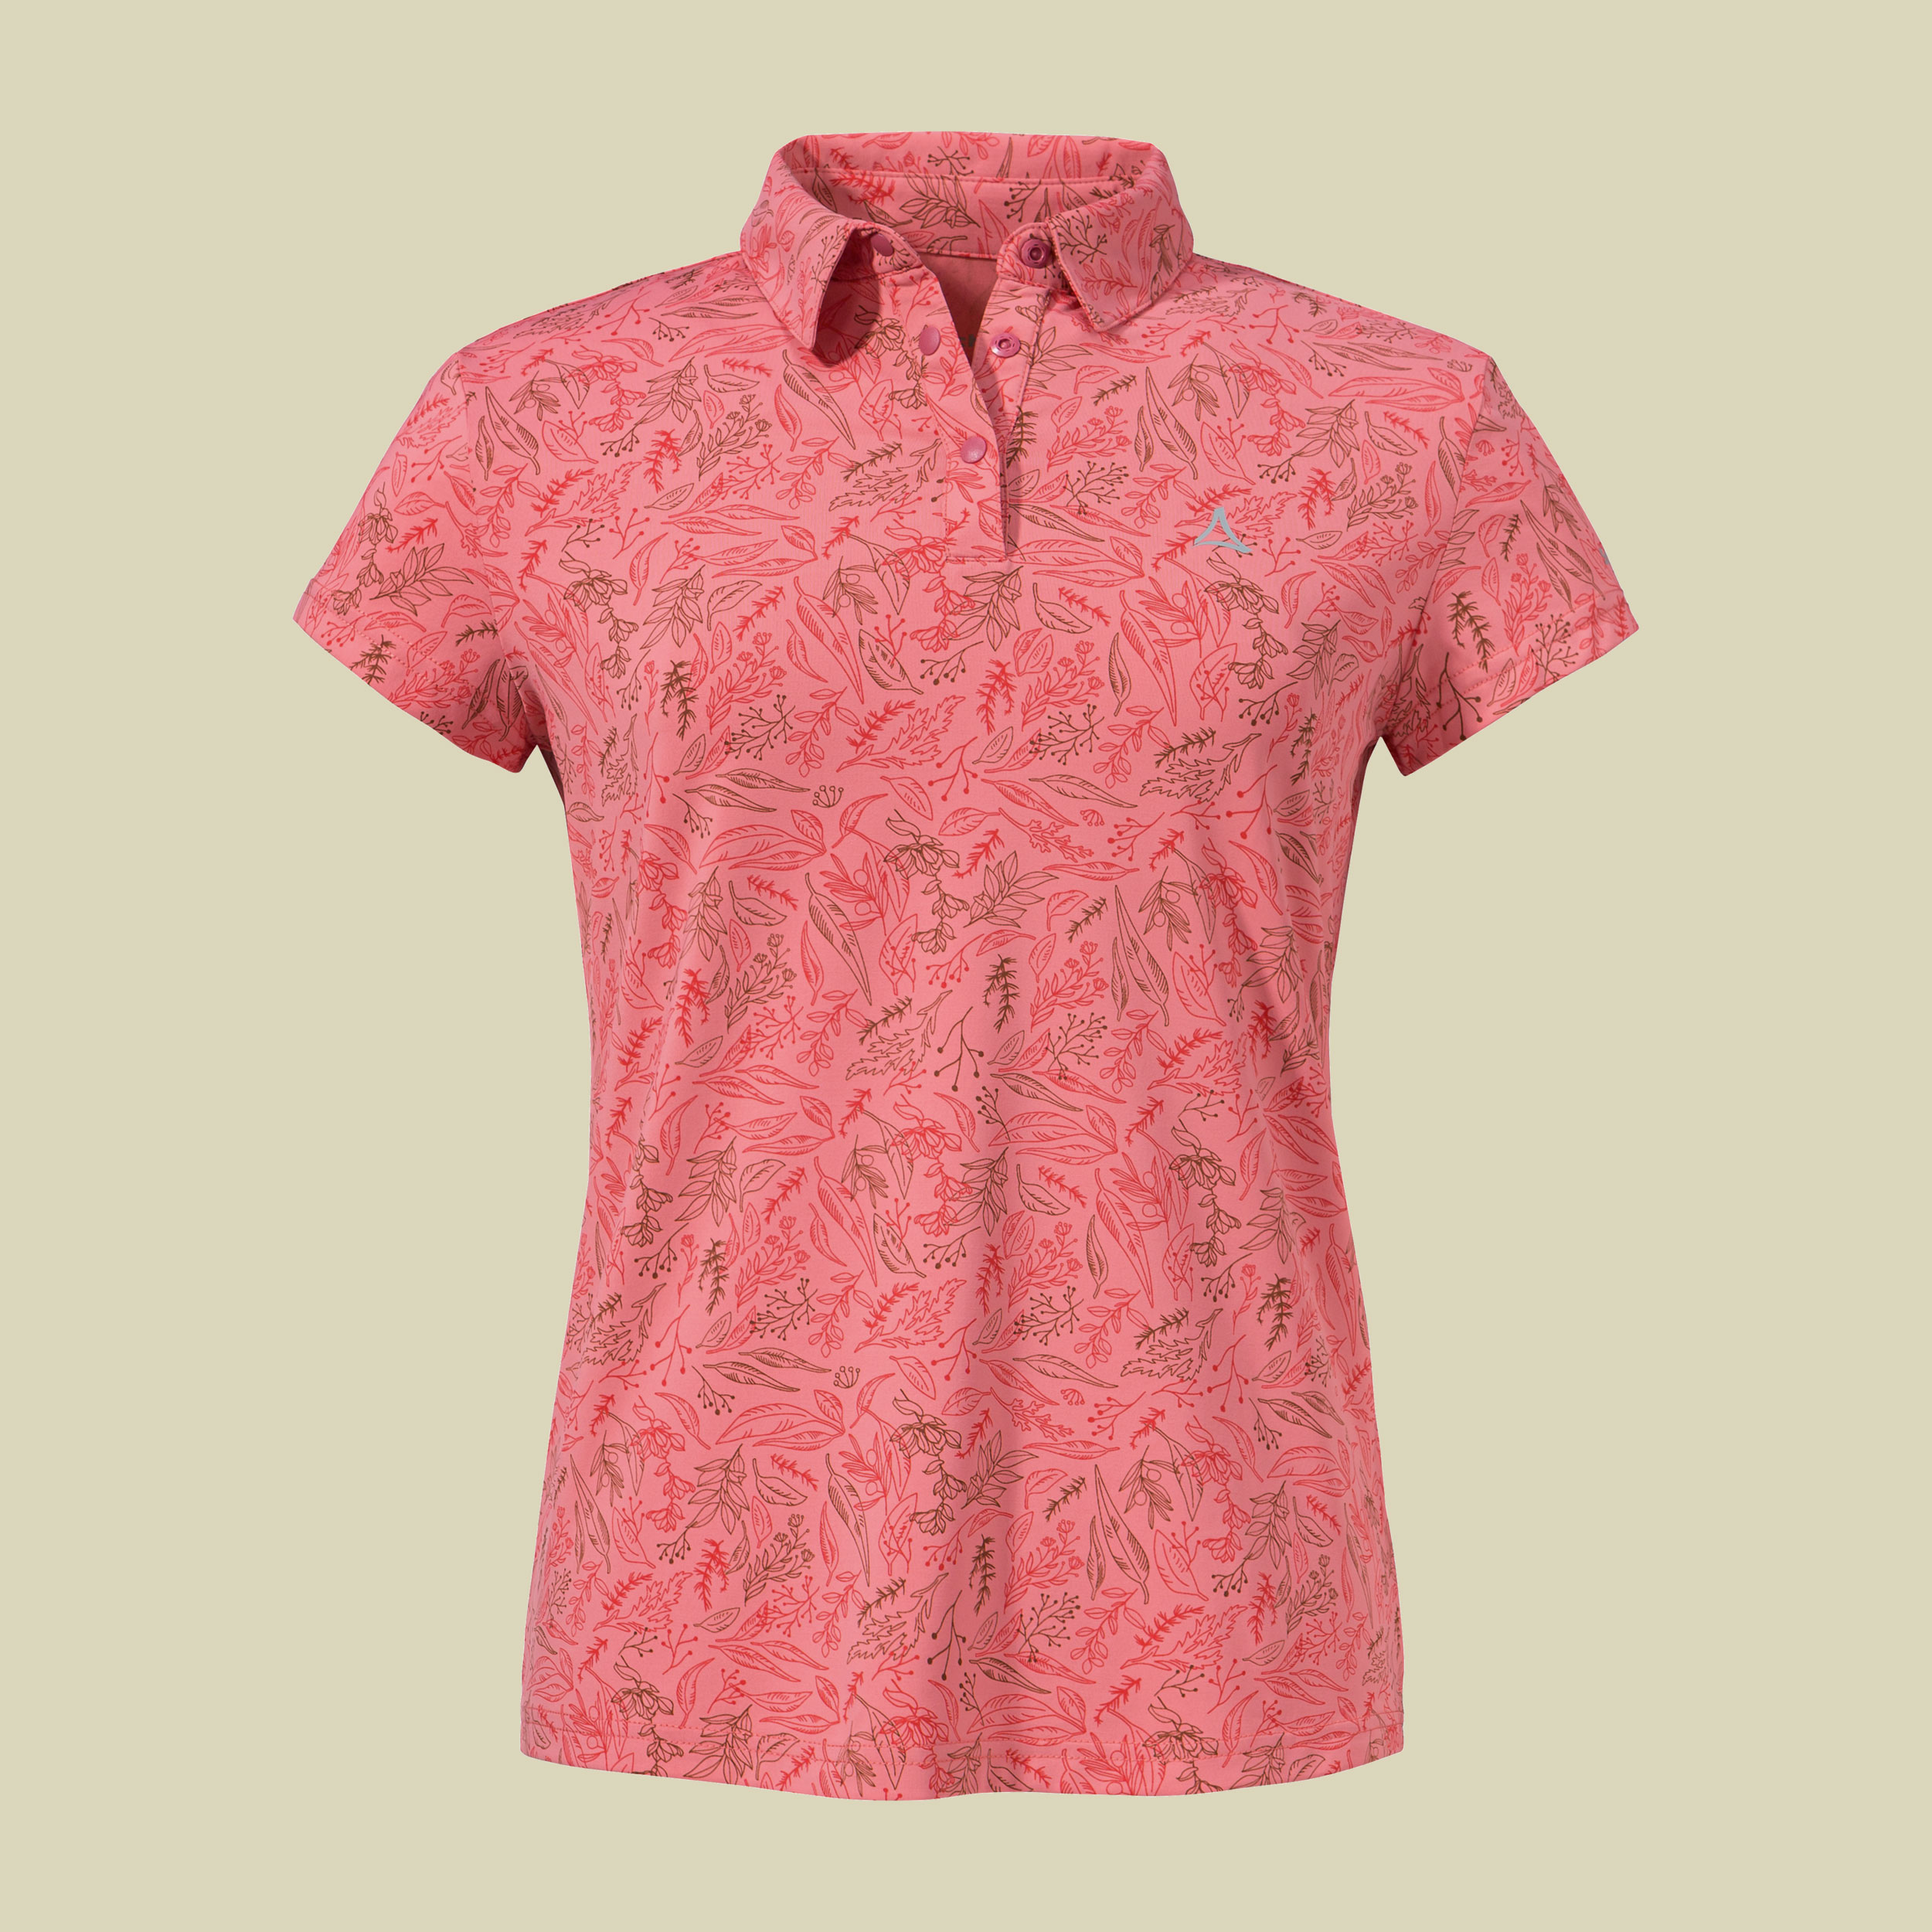 Polo Shirt Sternplatte L Women 36 rot - clasping rose